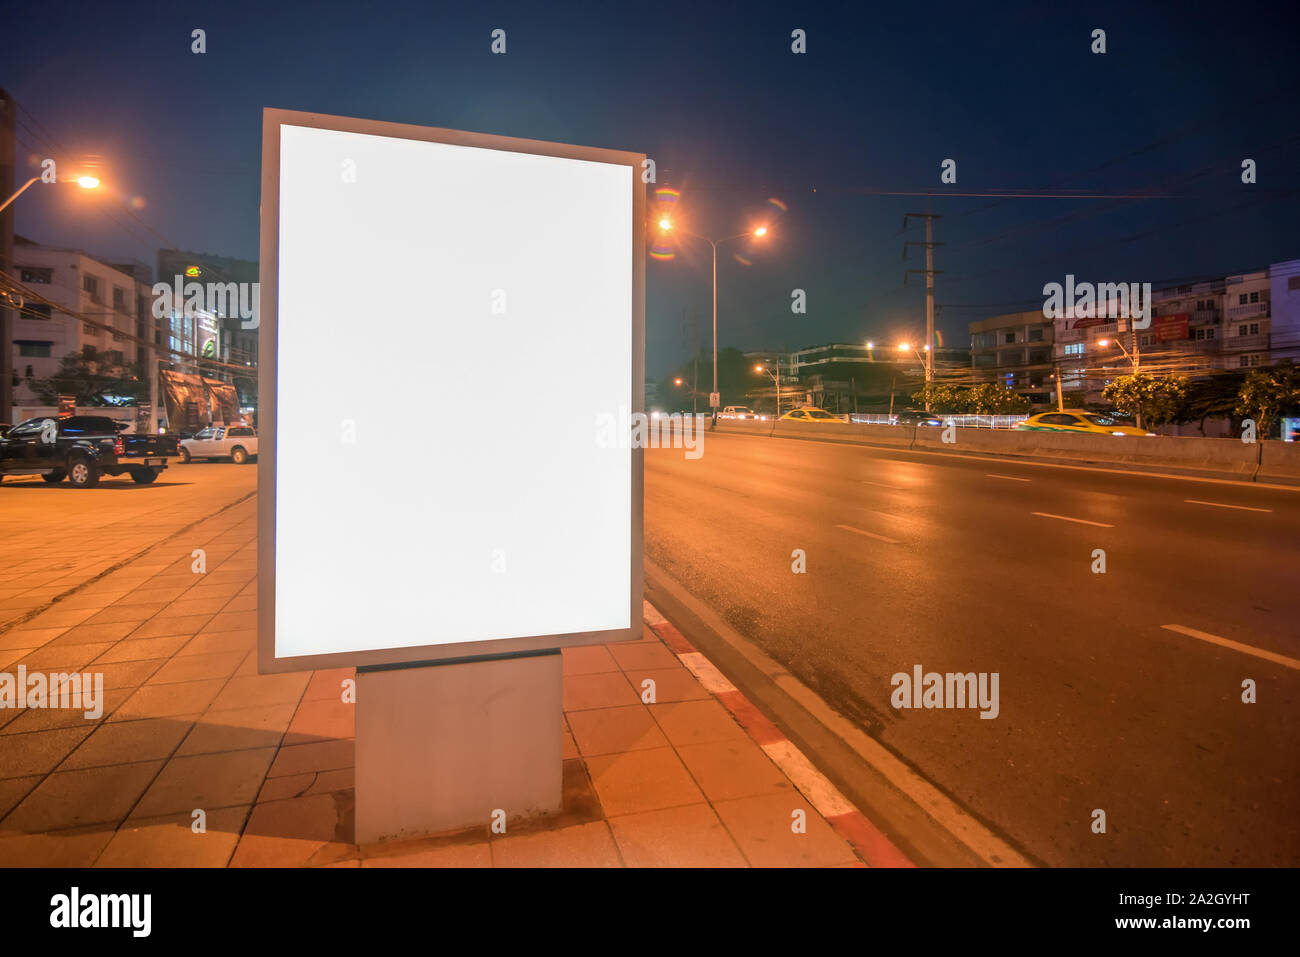 Blank Billboard on City Street at Night Banque D'Images